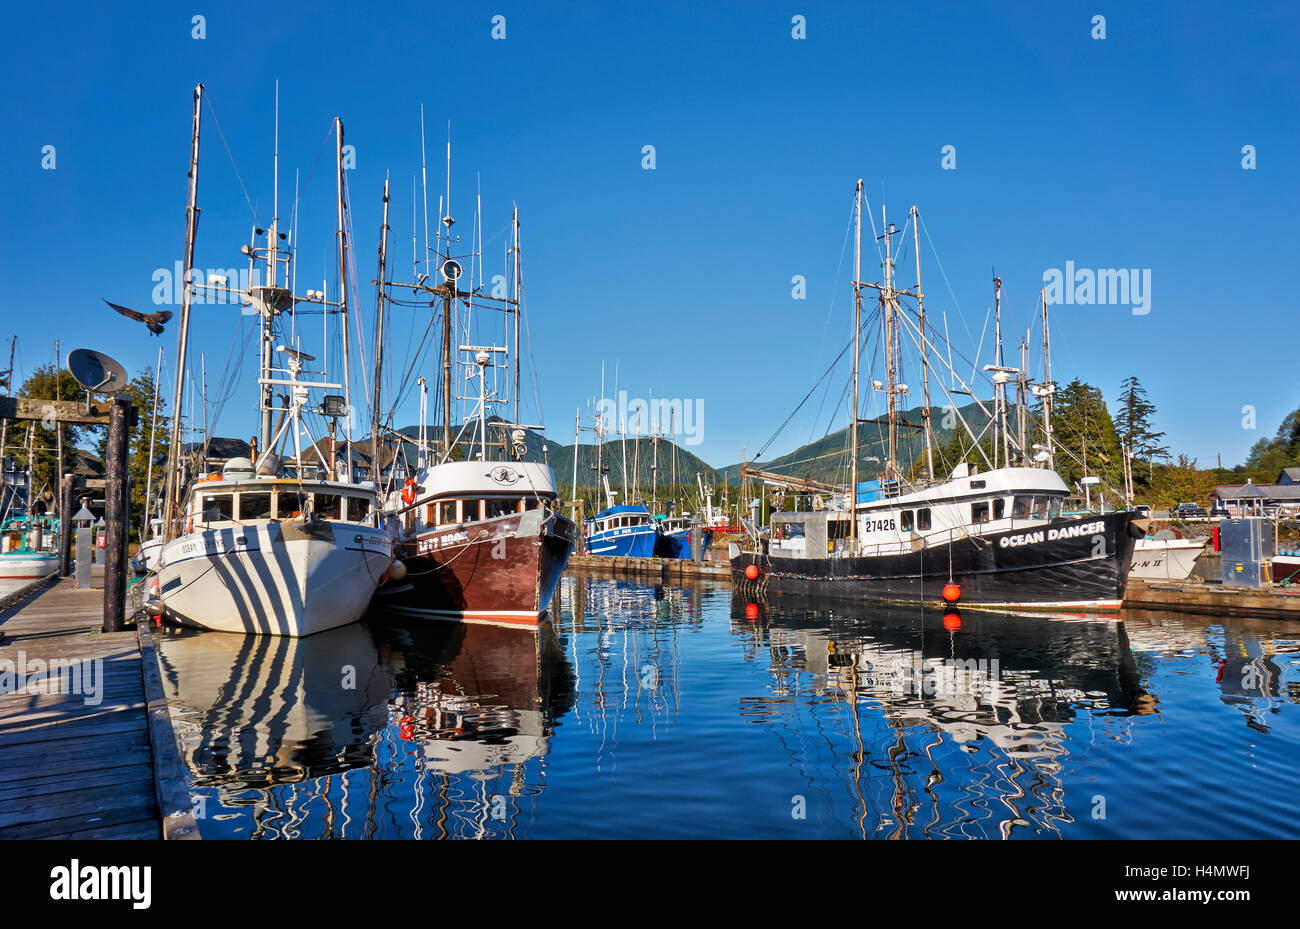 Vessels in harbor of Ucluelet, Vancouver Island, British Columbia, Canada Stock Photo